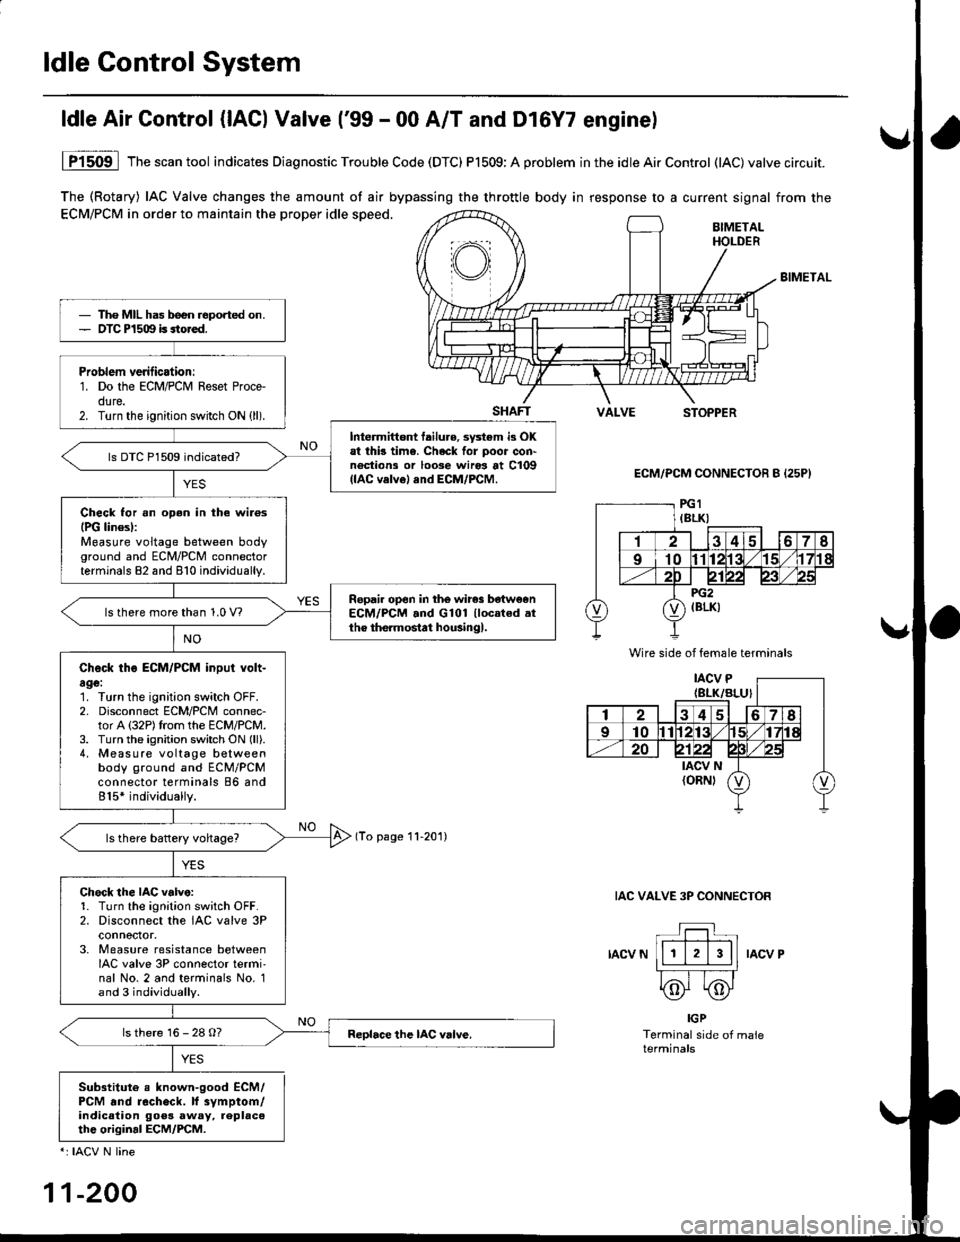 HONDA CIVIC 1998 6.G Workshop Manual ldle Gontrol System
The (Rotary) IAC Valve changes the amount of air bypassing the throttle body in response to a current signal from the
ECM/PCM in order to maintain the proper idle speed.BIMETALHOLD